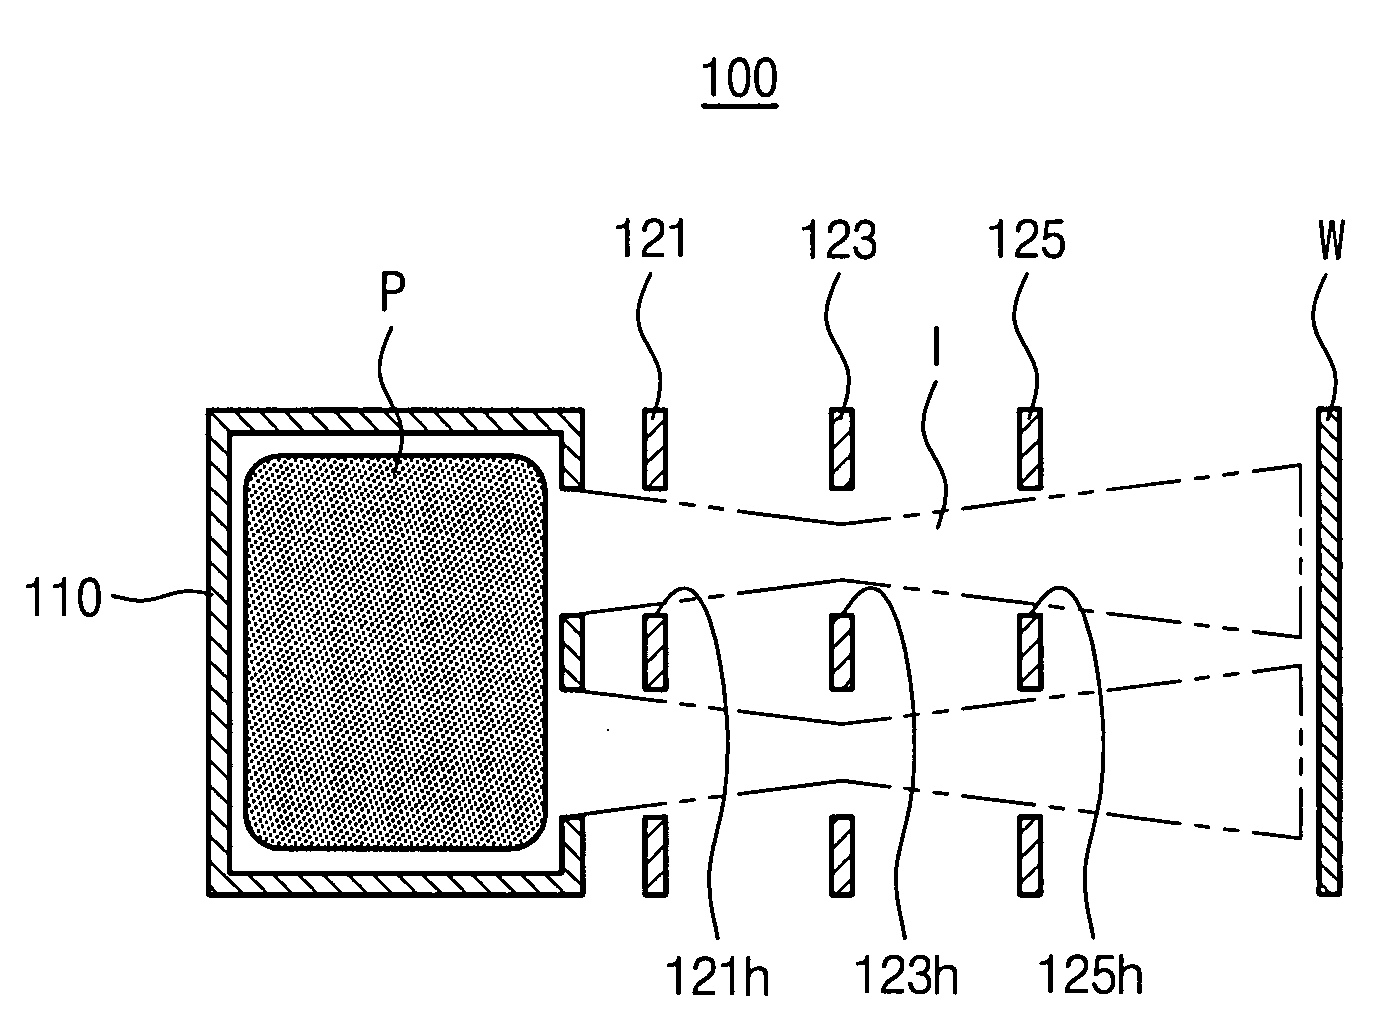 Apparatus and method for controlling ion beam